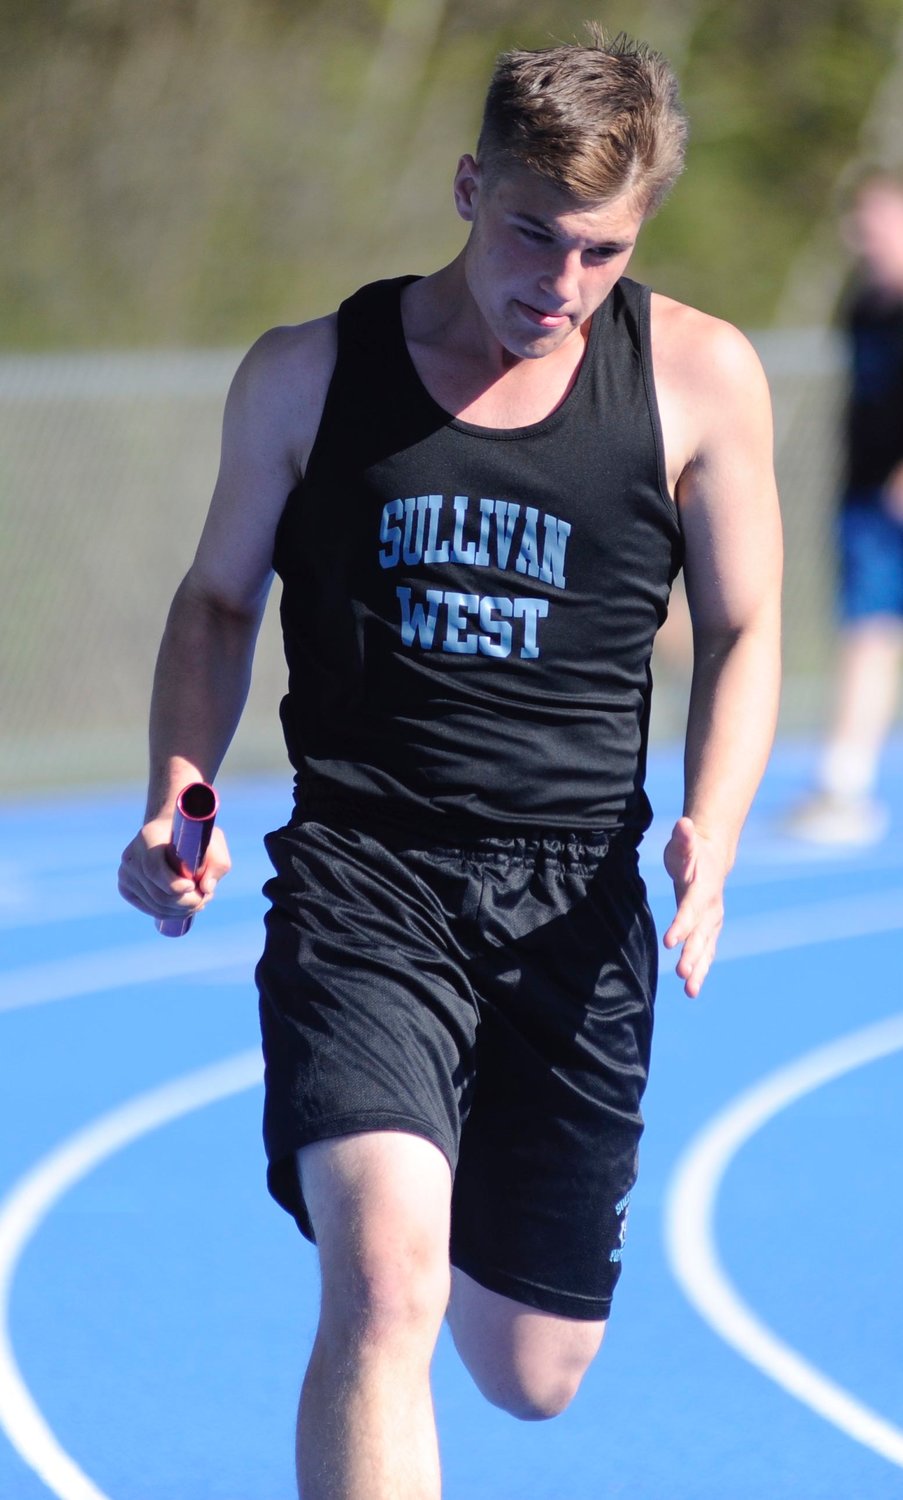 Concentration in motion. Sullivan West’s Nathan Coy near the finish in a relay race.